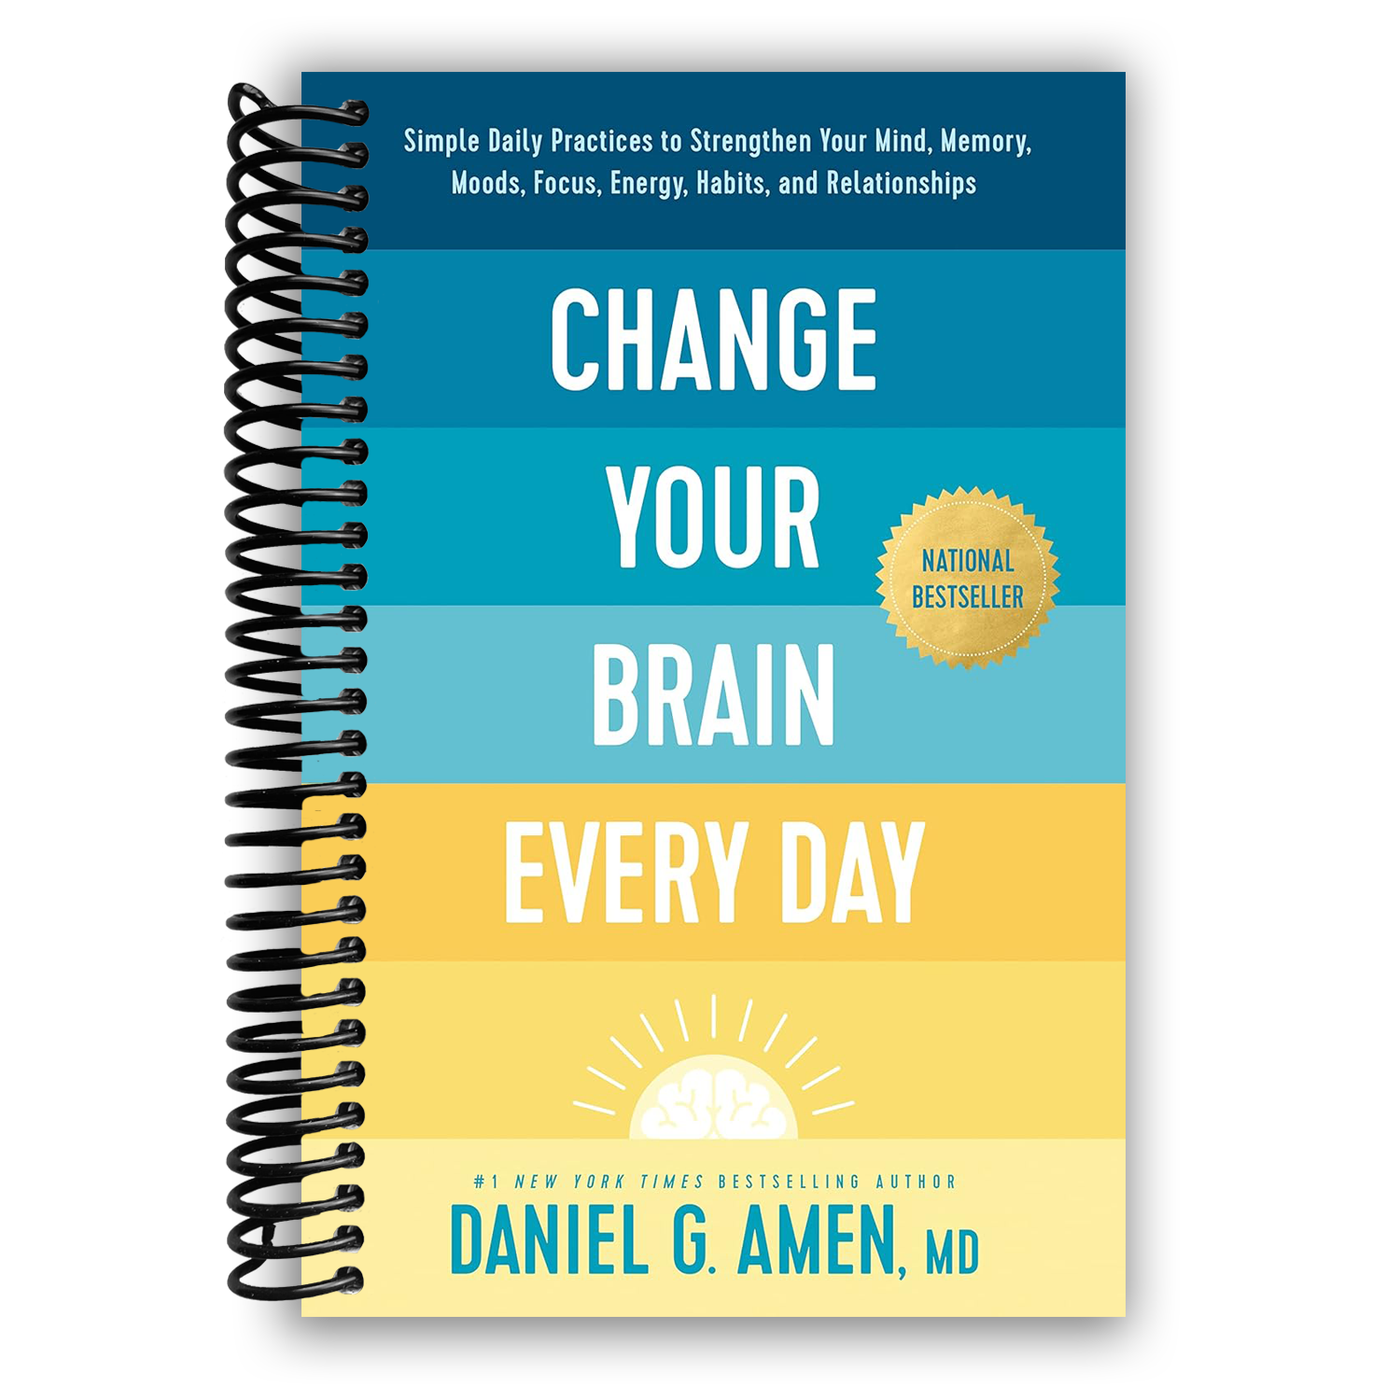 Dr. Daniel Amen - Change Your Brain Every Day: Simple Daily Practices To  Strengthen Your Mind, Memory, Moods, Focus, Energy, Habits & Relationships  - London Real